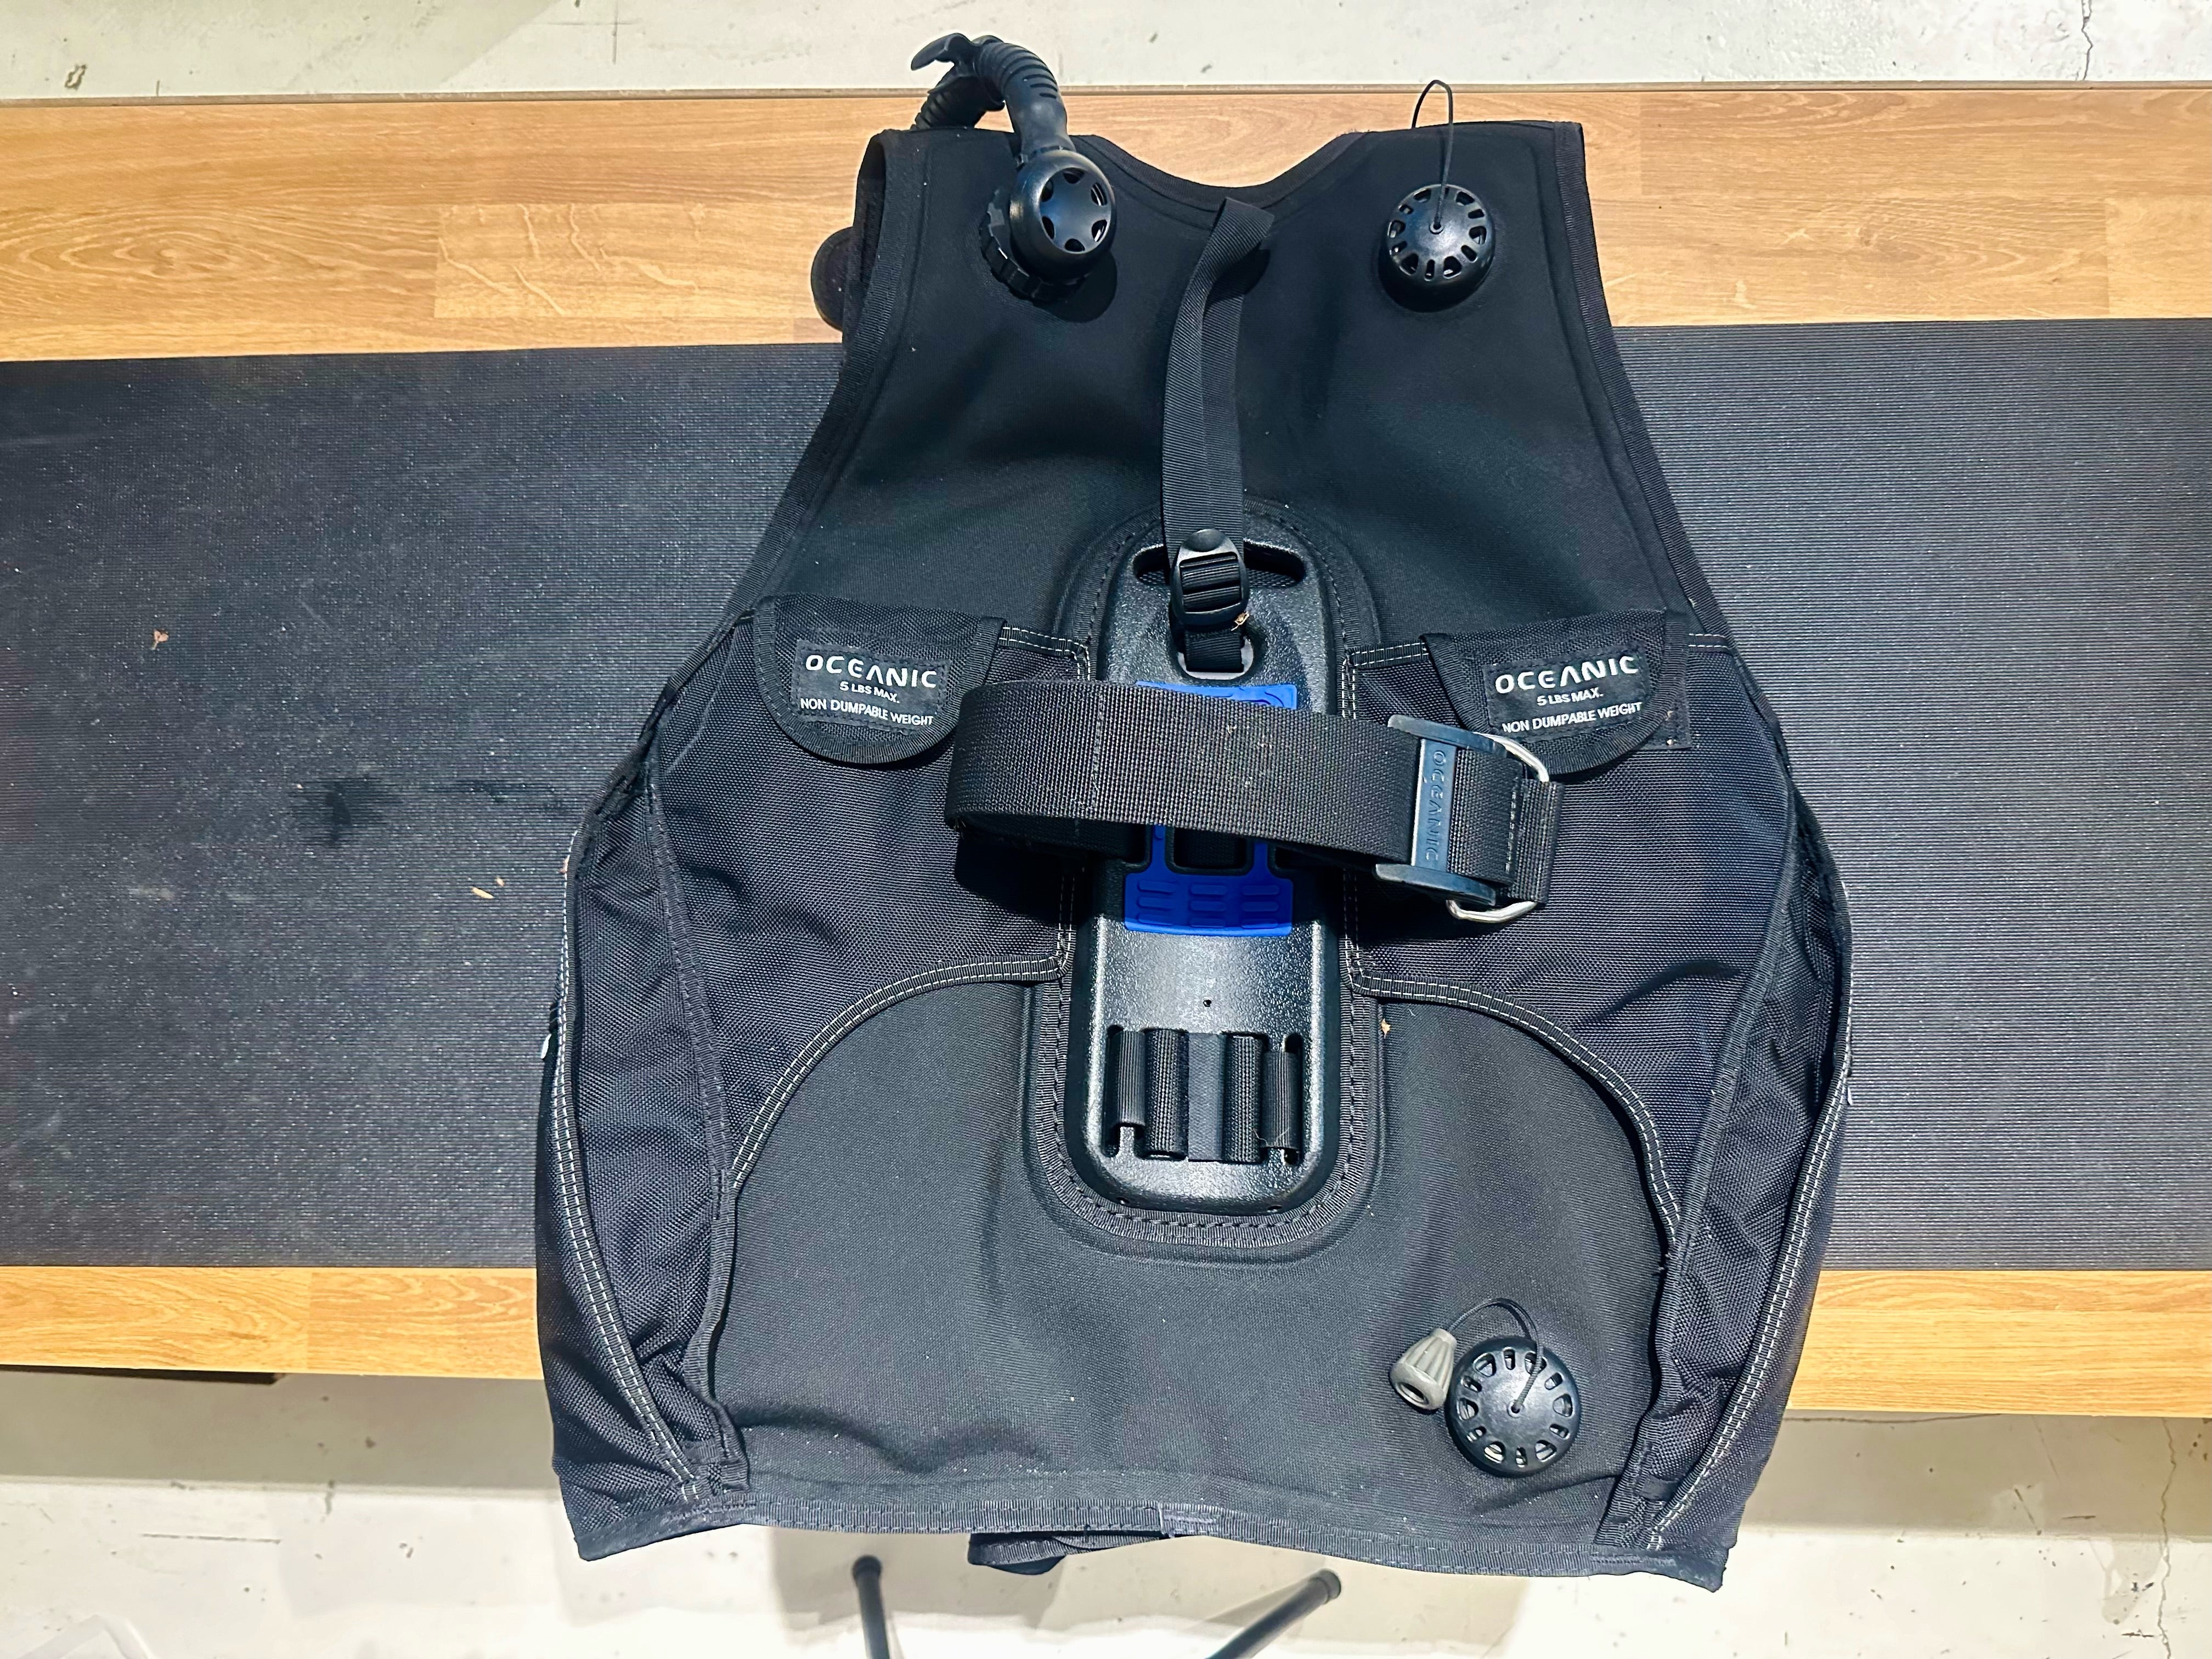 Oceanic OceanPro Used Size Medium | Diving Sports Canada | Vancouver